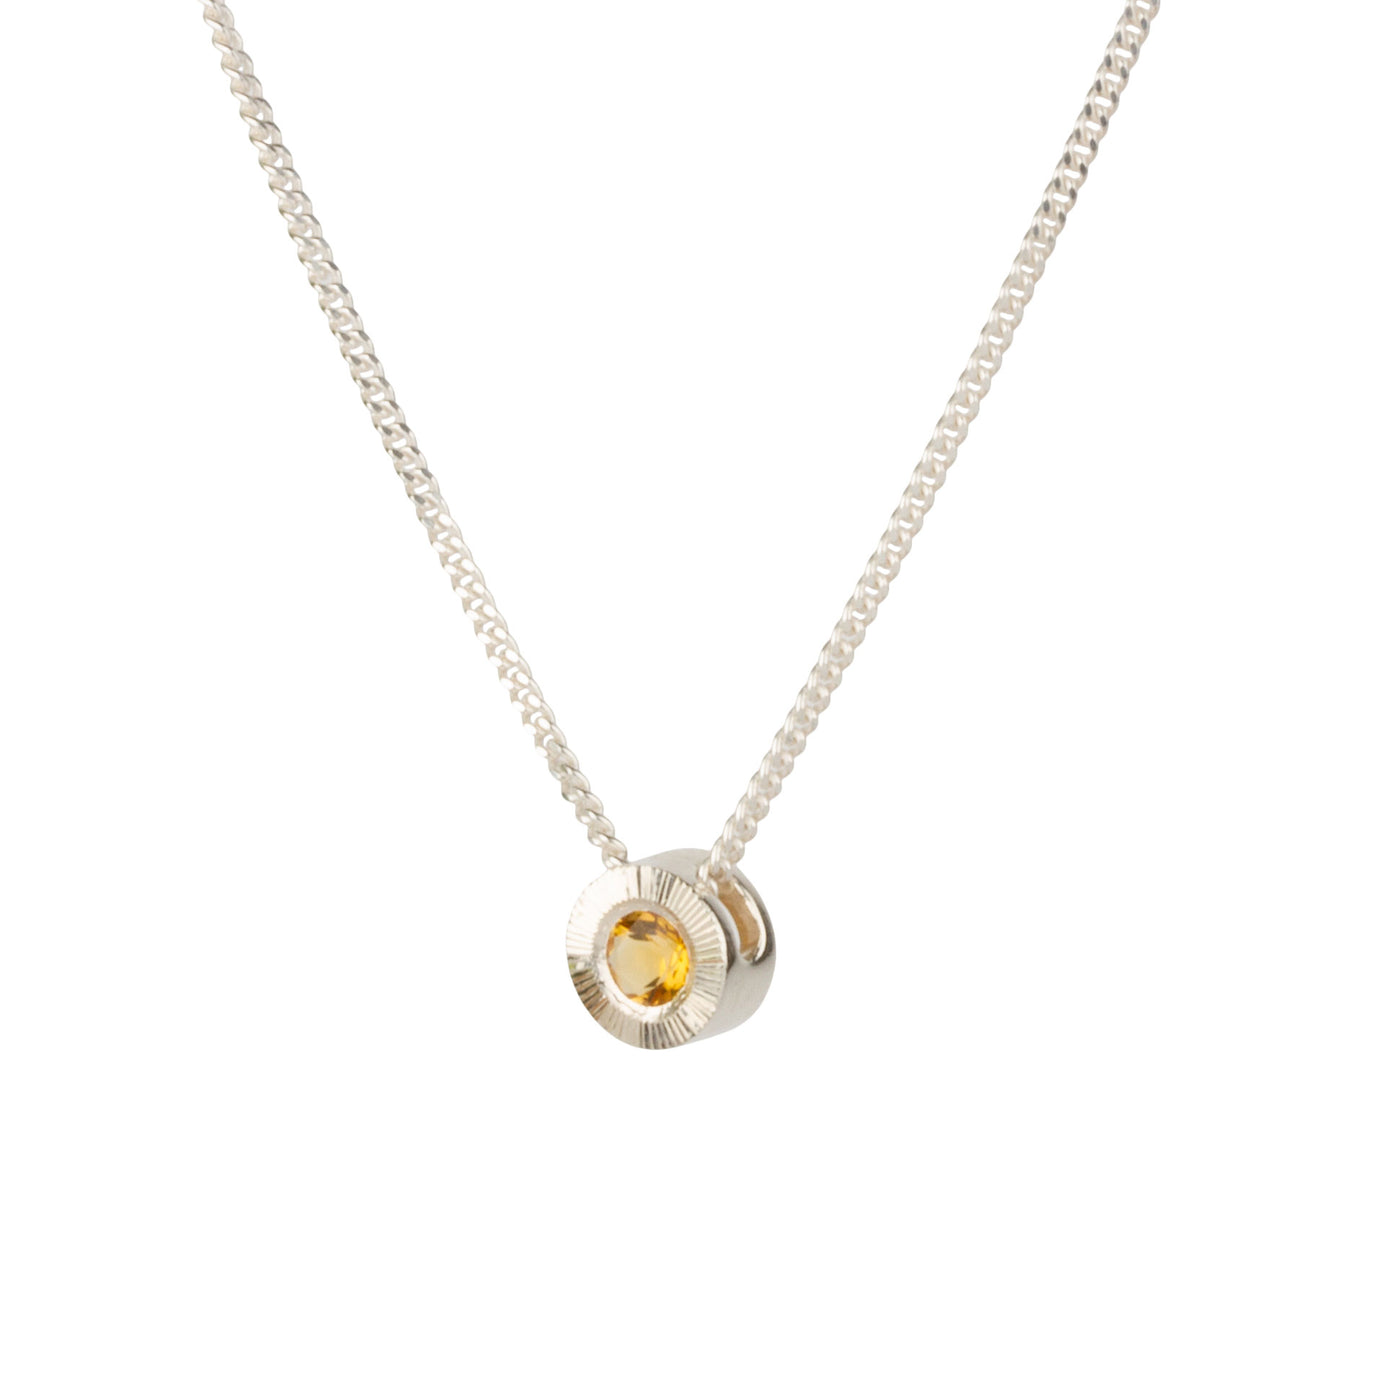 Citrine aurora necklace in silver on white background, side angle